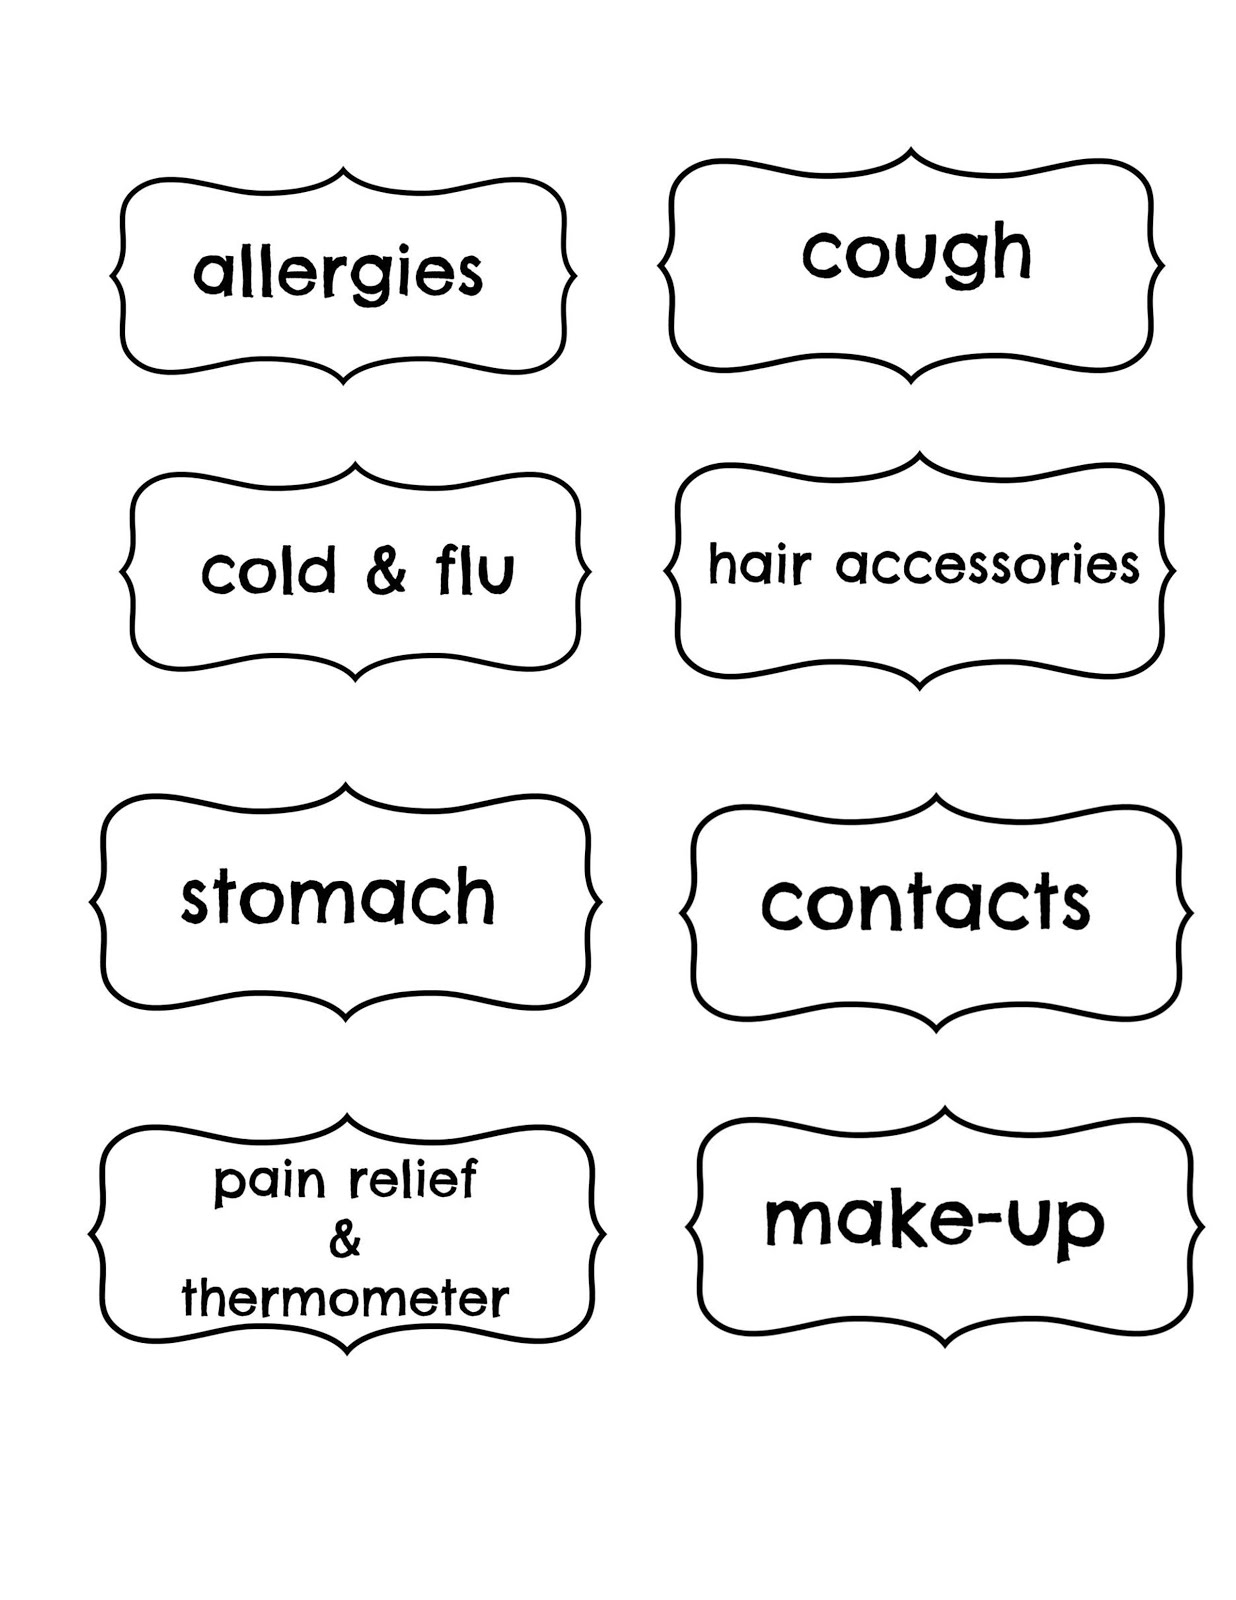 label-printable-images-gallery-category-page-26-printablee